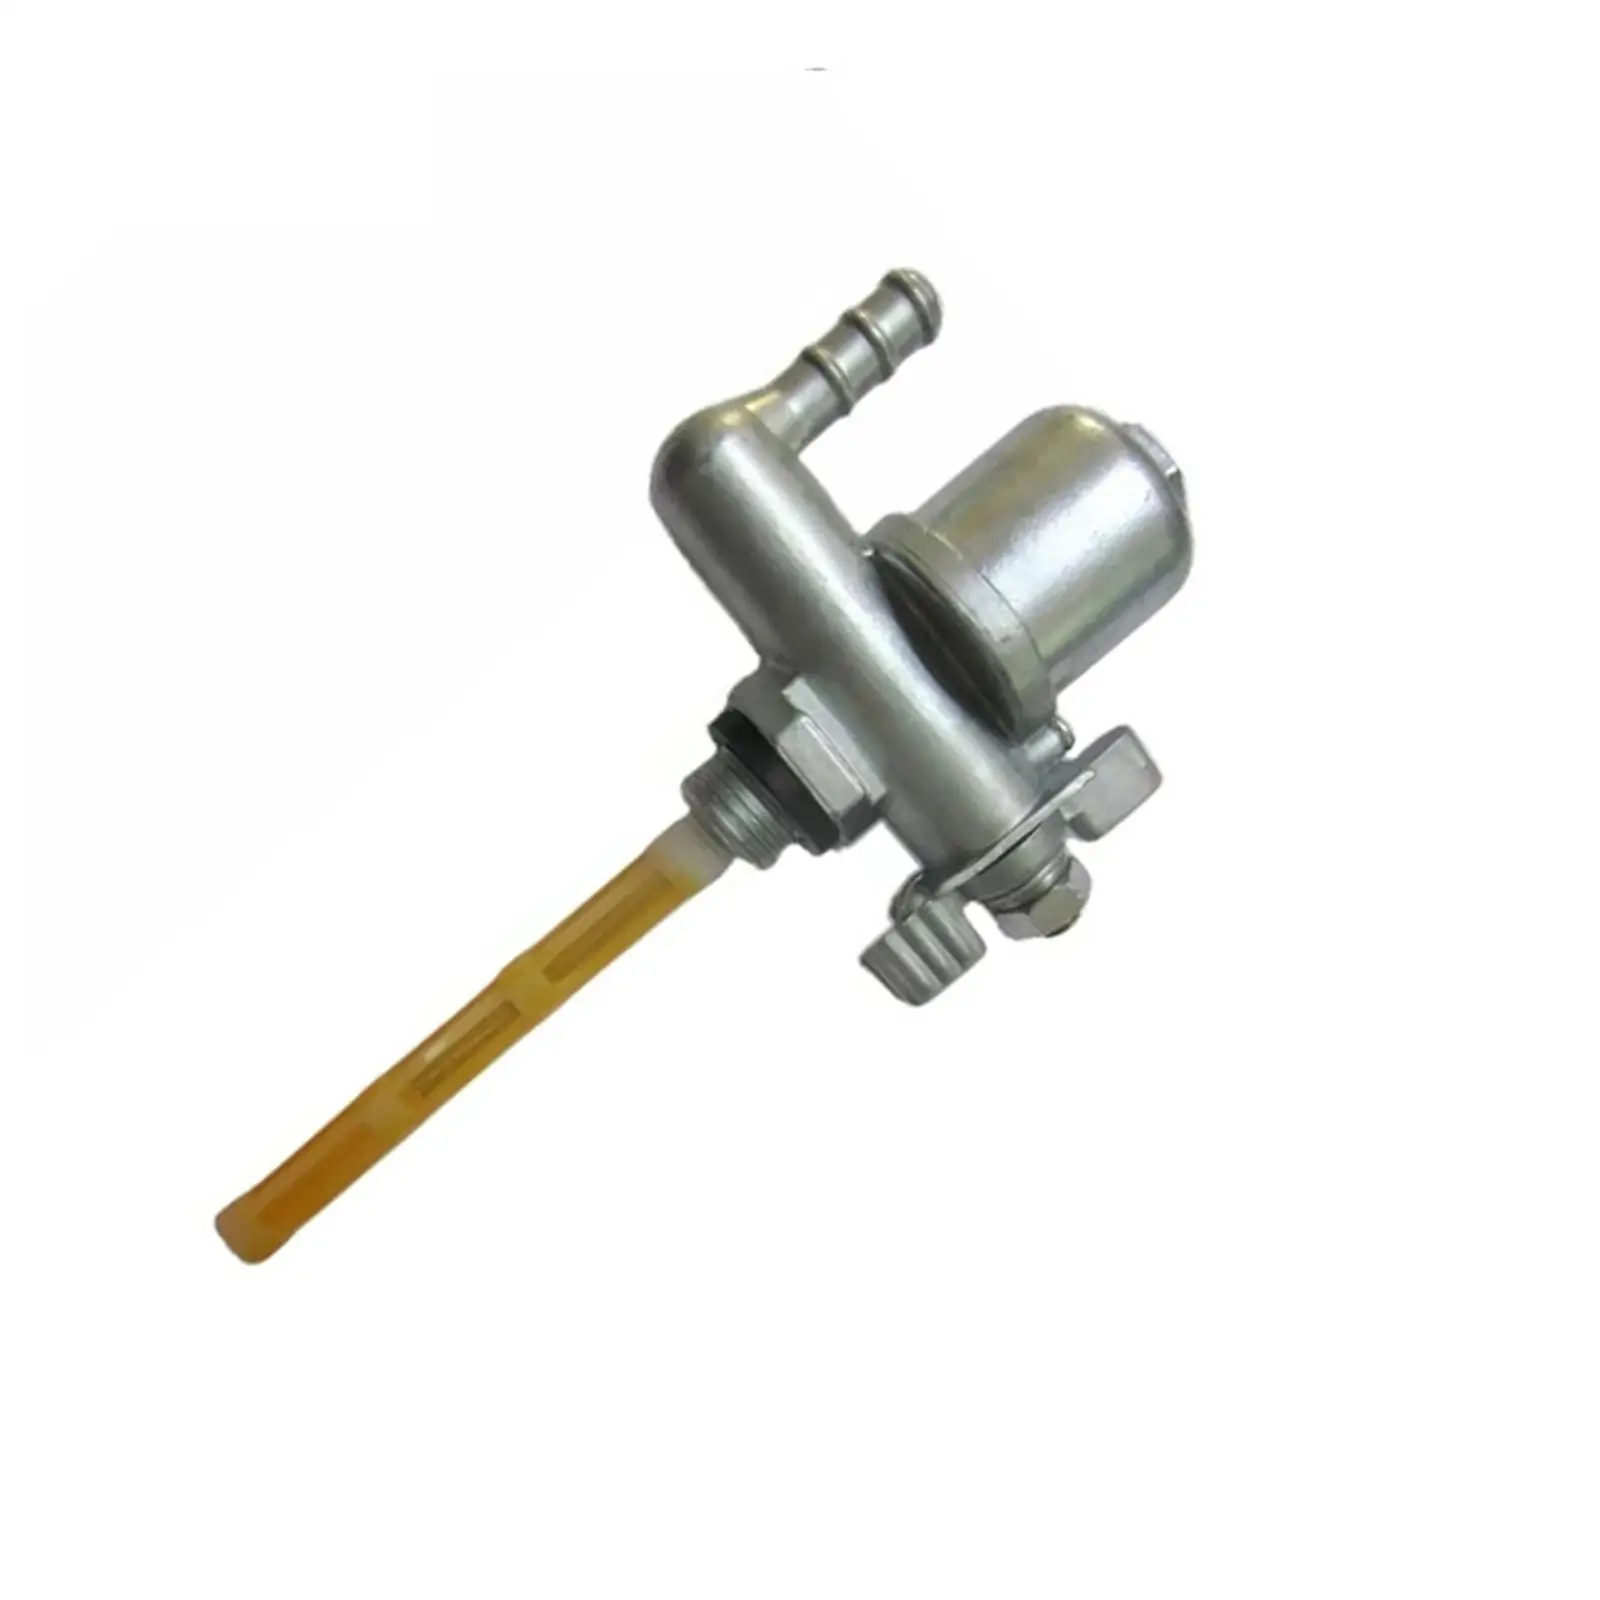 Motorcycle Fuel Gas Petcock Valve switch for Ruassia Msk Motorbike Accessories